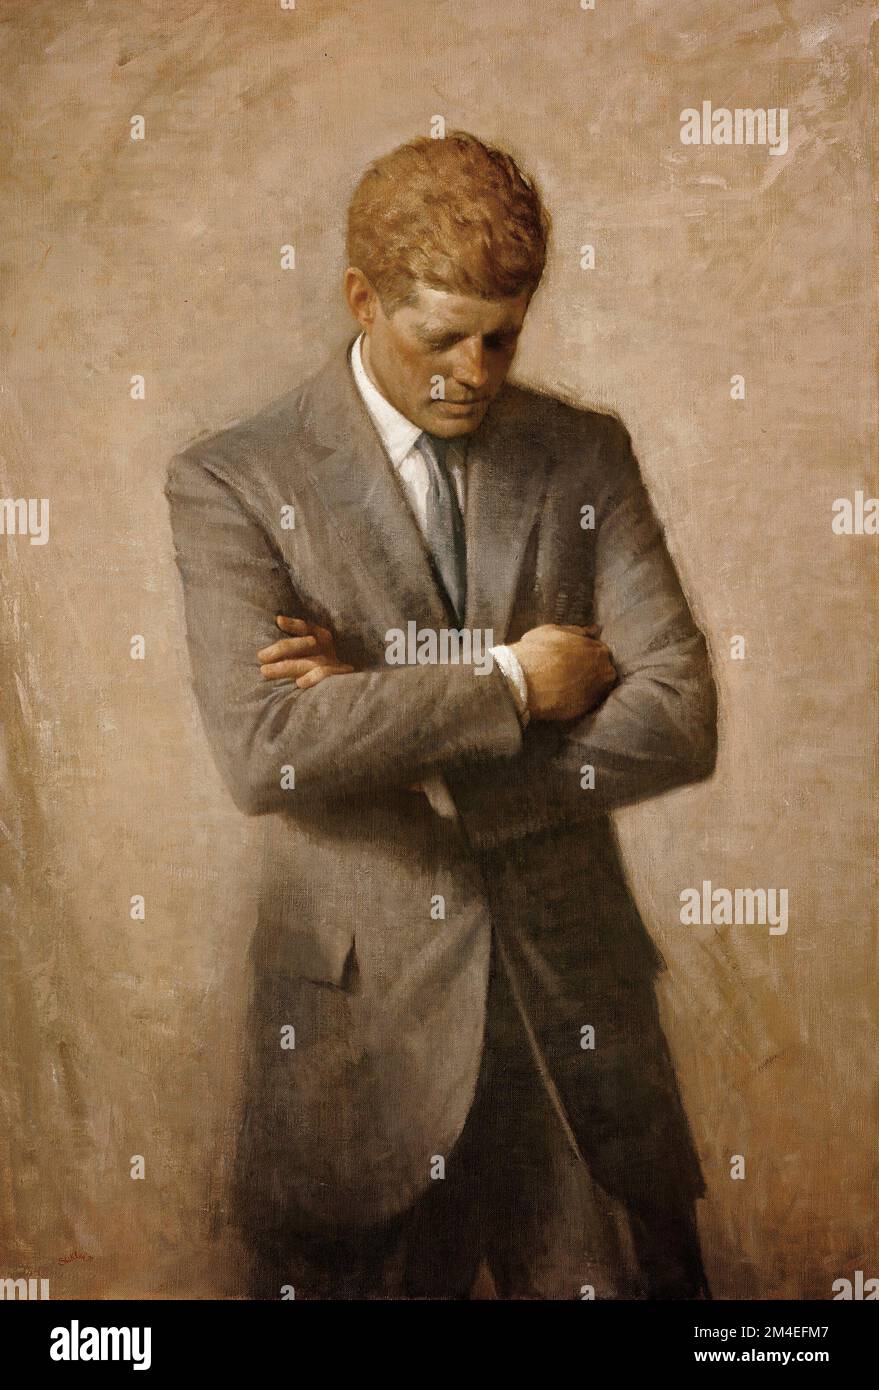 Official White House portrait of John F Kennedy, by Aaron Shikler Stock Photo